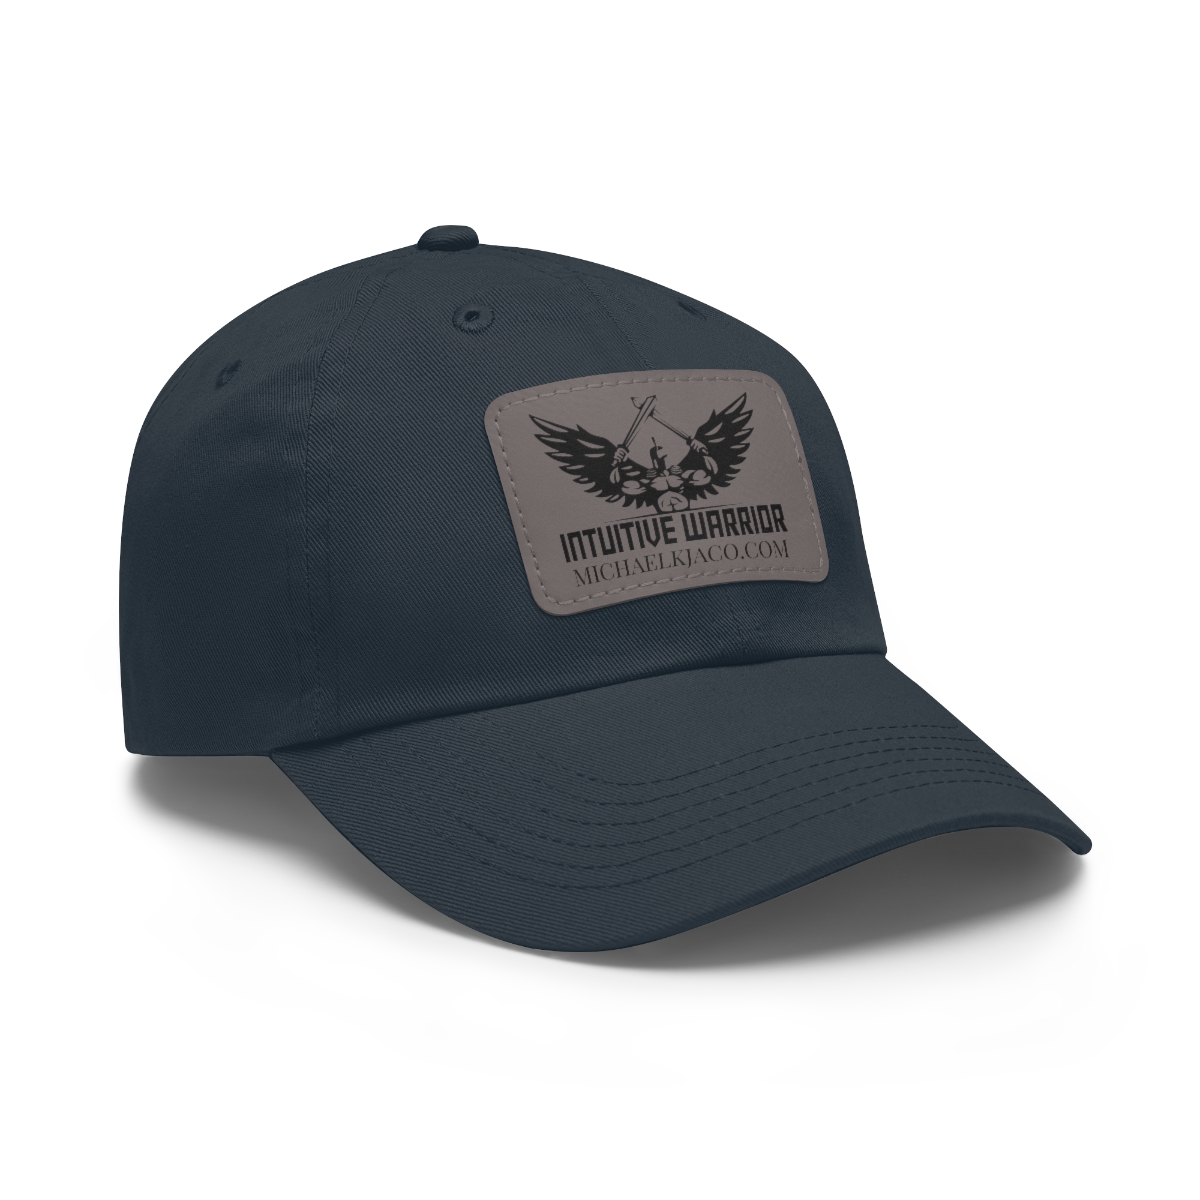 INTUITIVE WARRIOR Dad Hat with Leather Patch